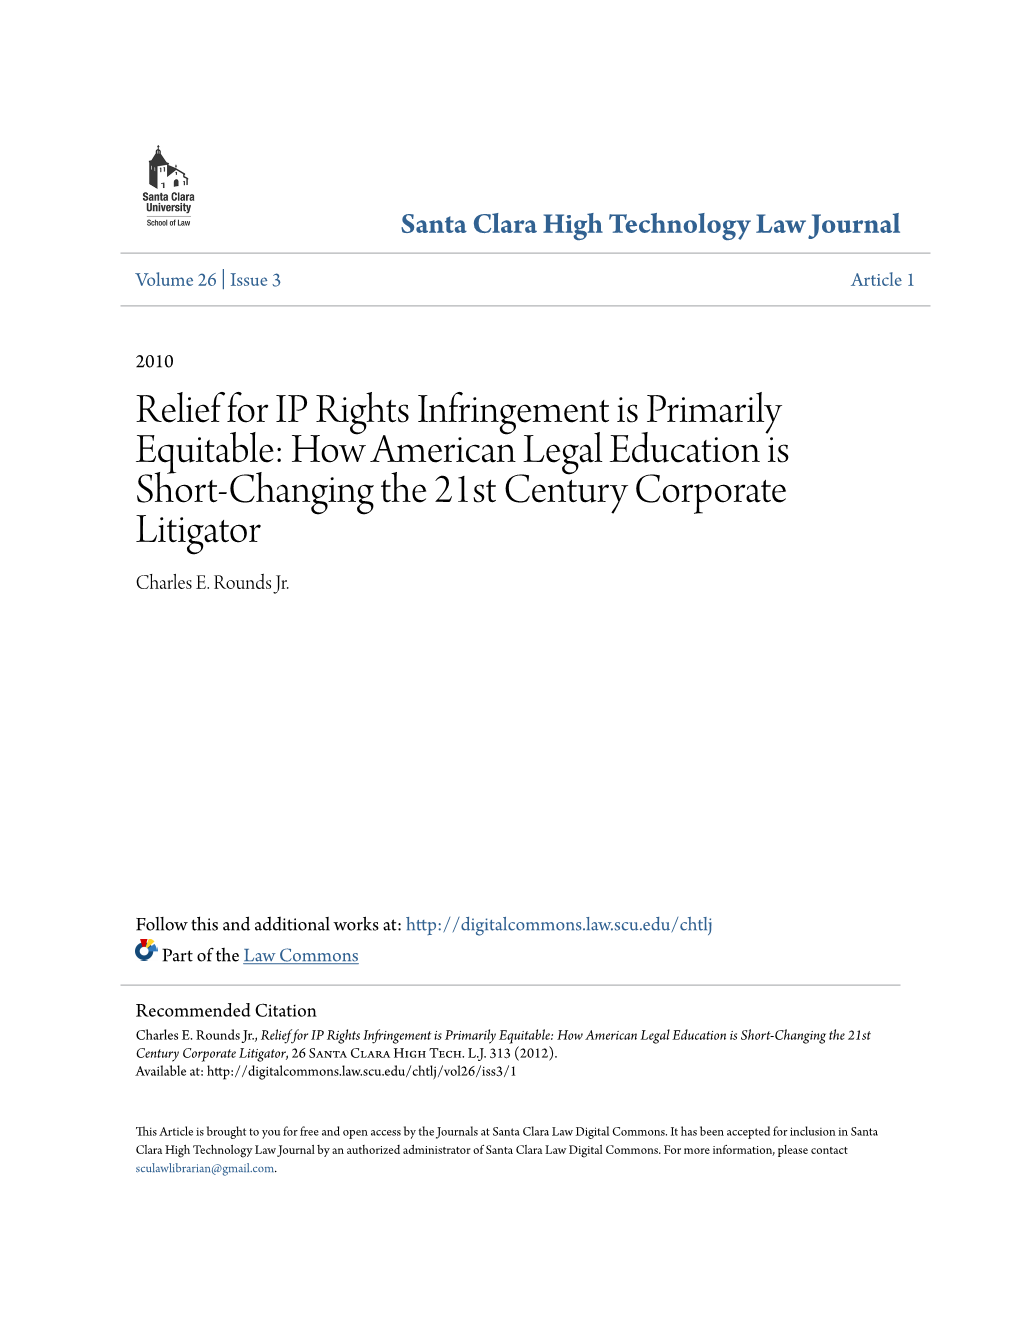 Relief for IP Rights Infringement Is Primarily Equitable: How American Legal Education Is Short-Changing the 21St Century Corporate Litigator Charles E